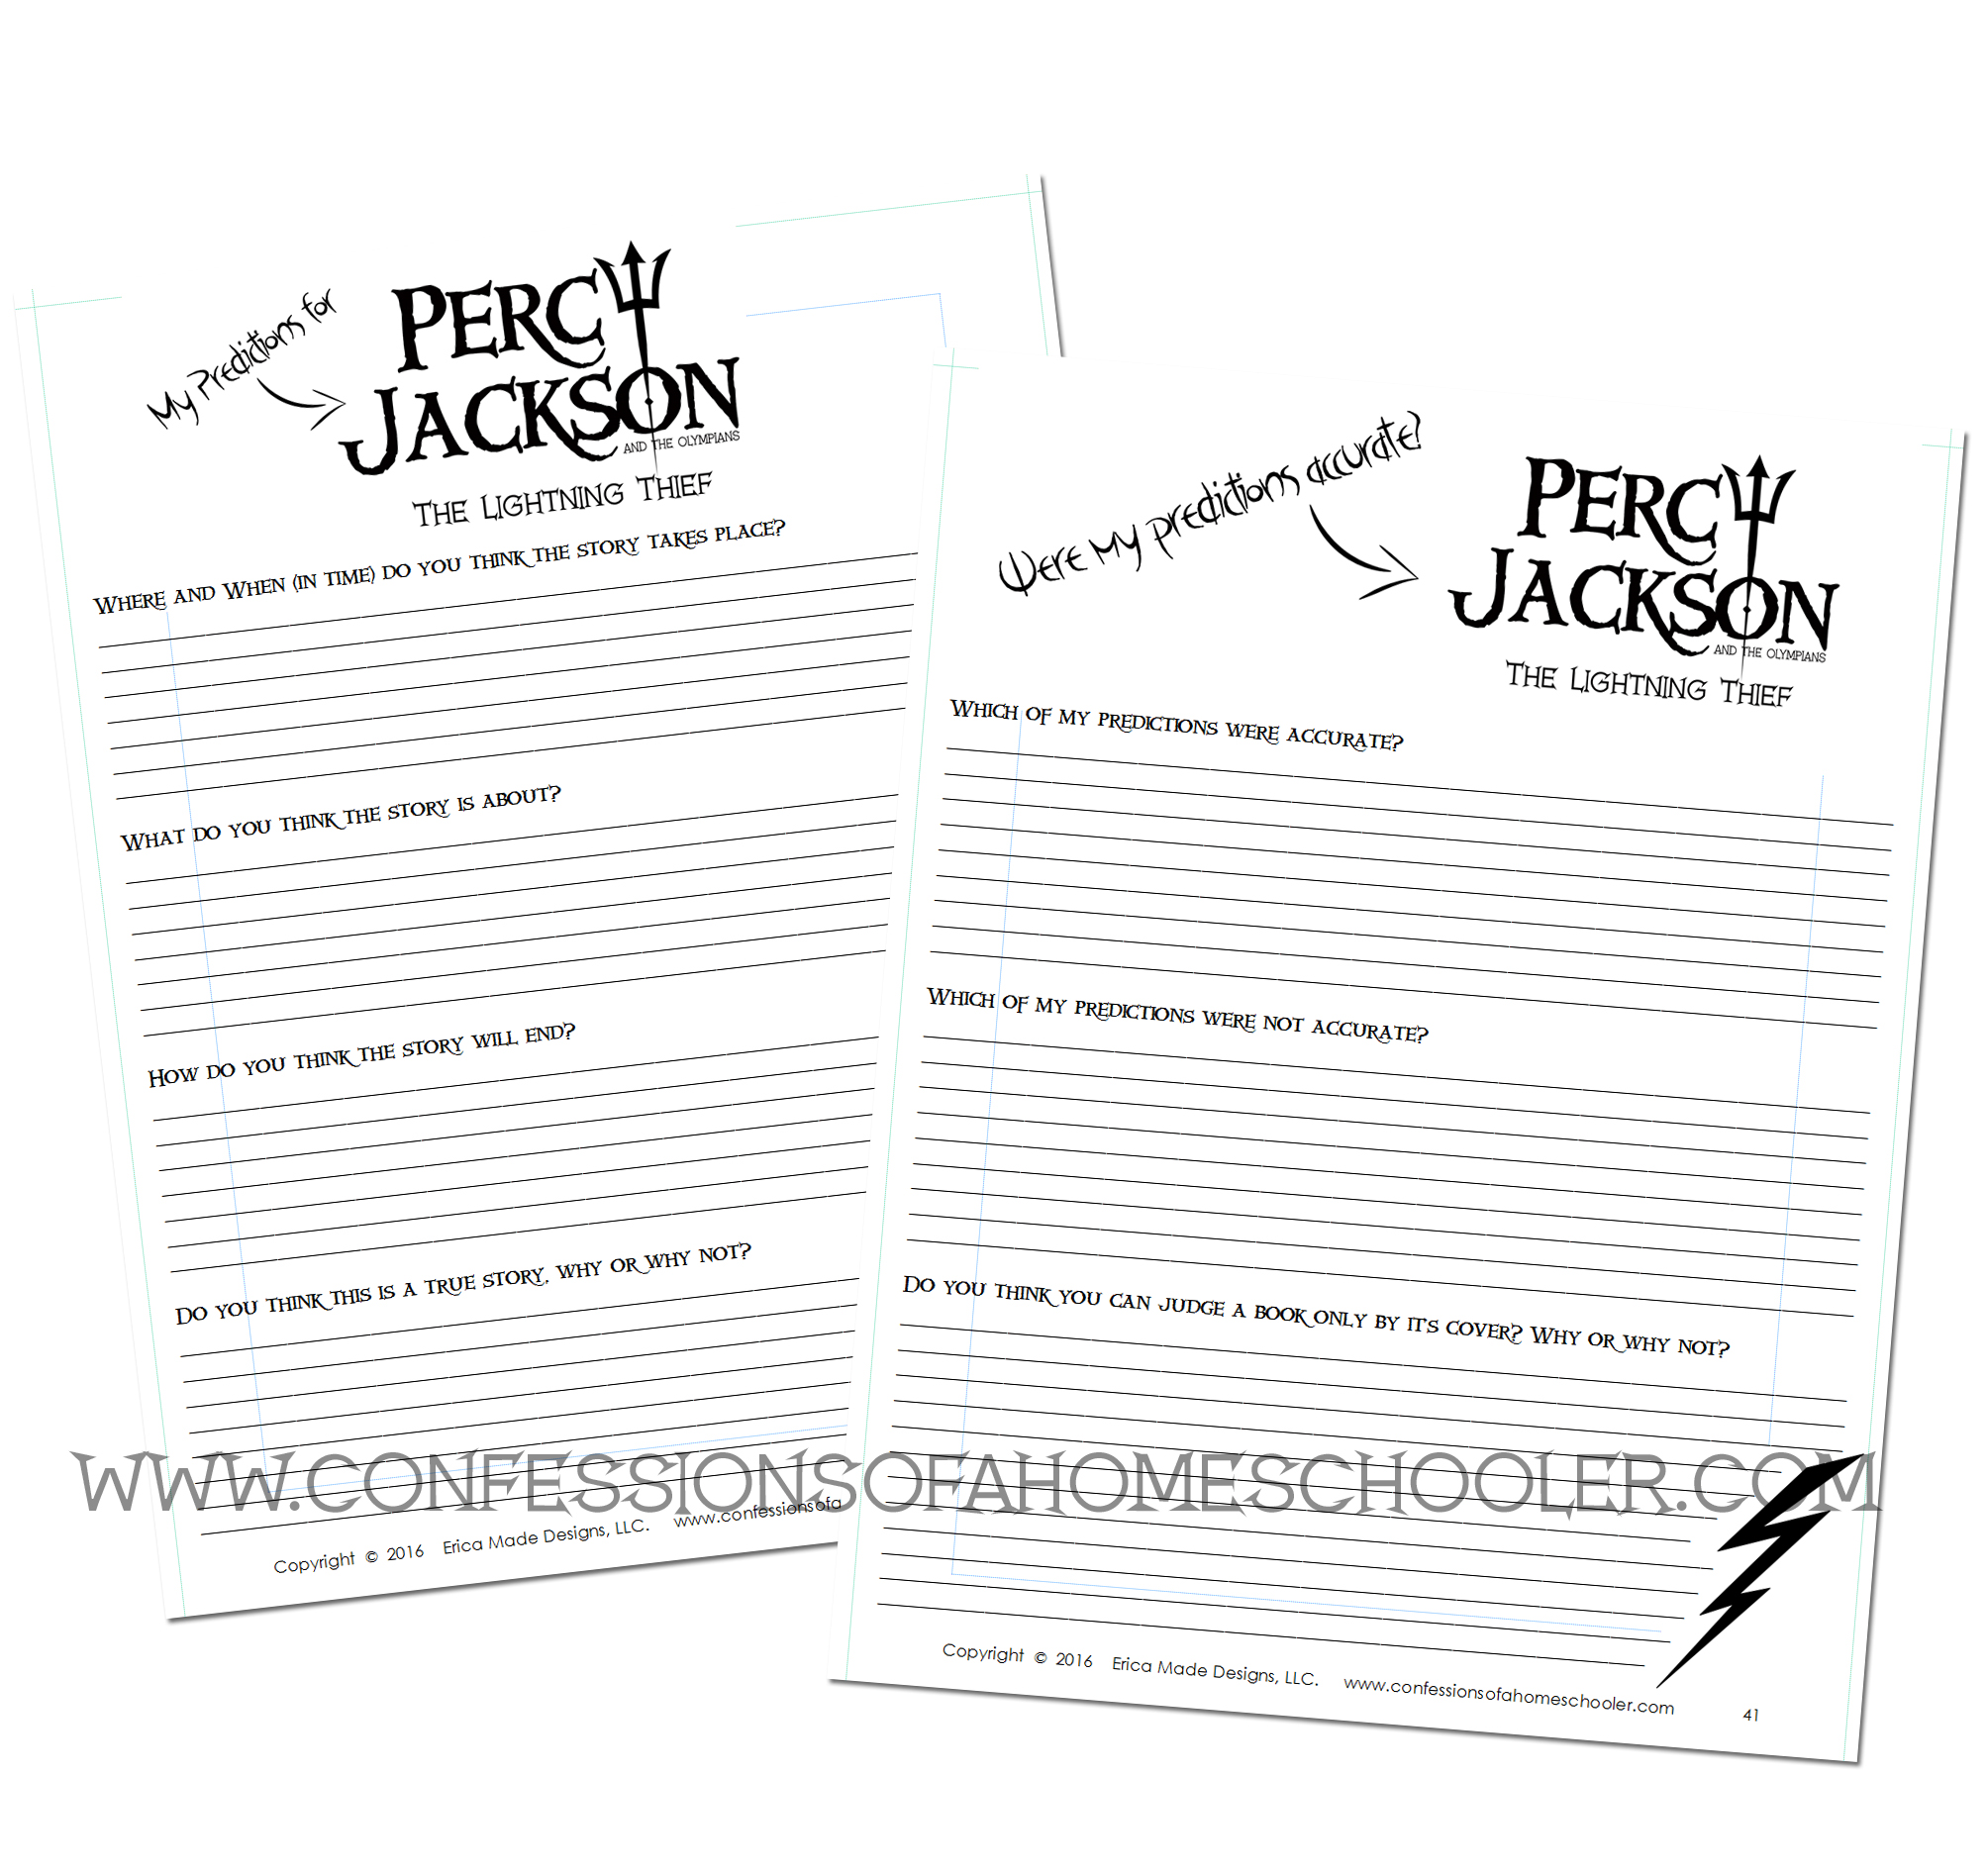 percy jackson the lightning thief unit study pdf lit47 7 95 confessions of a homeschooler online store for printables curriculum preschool and more